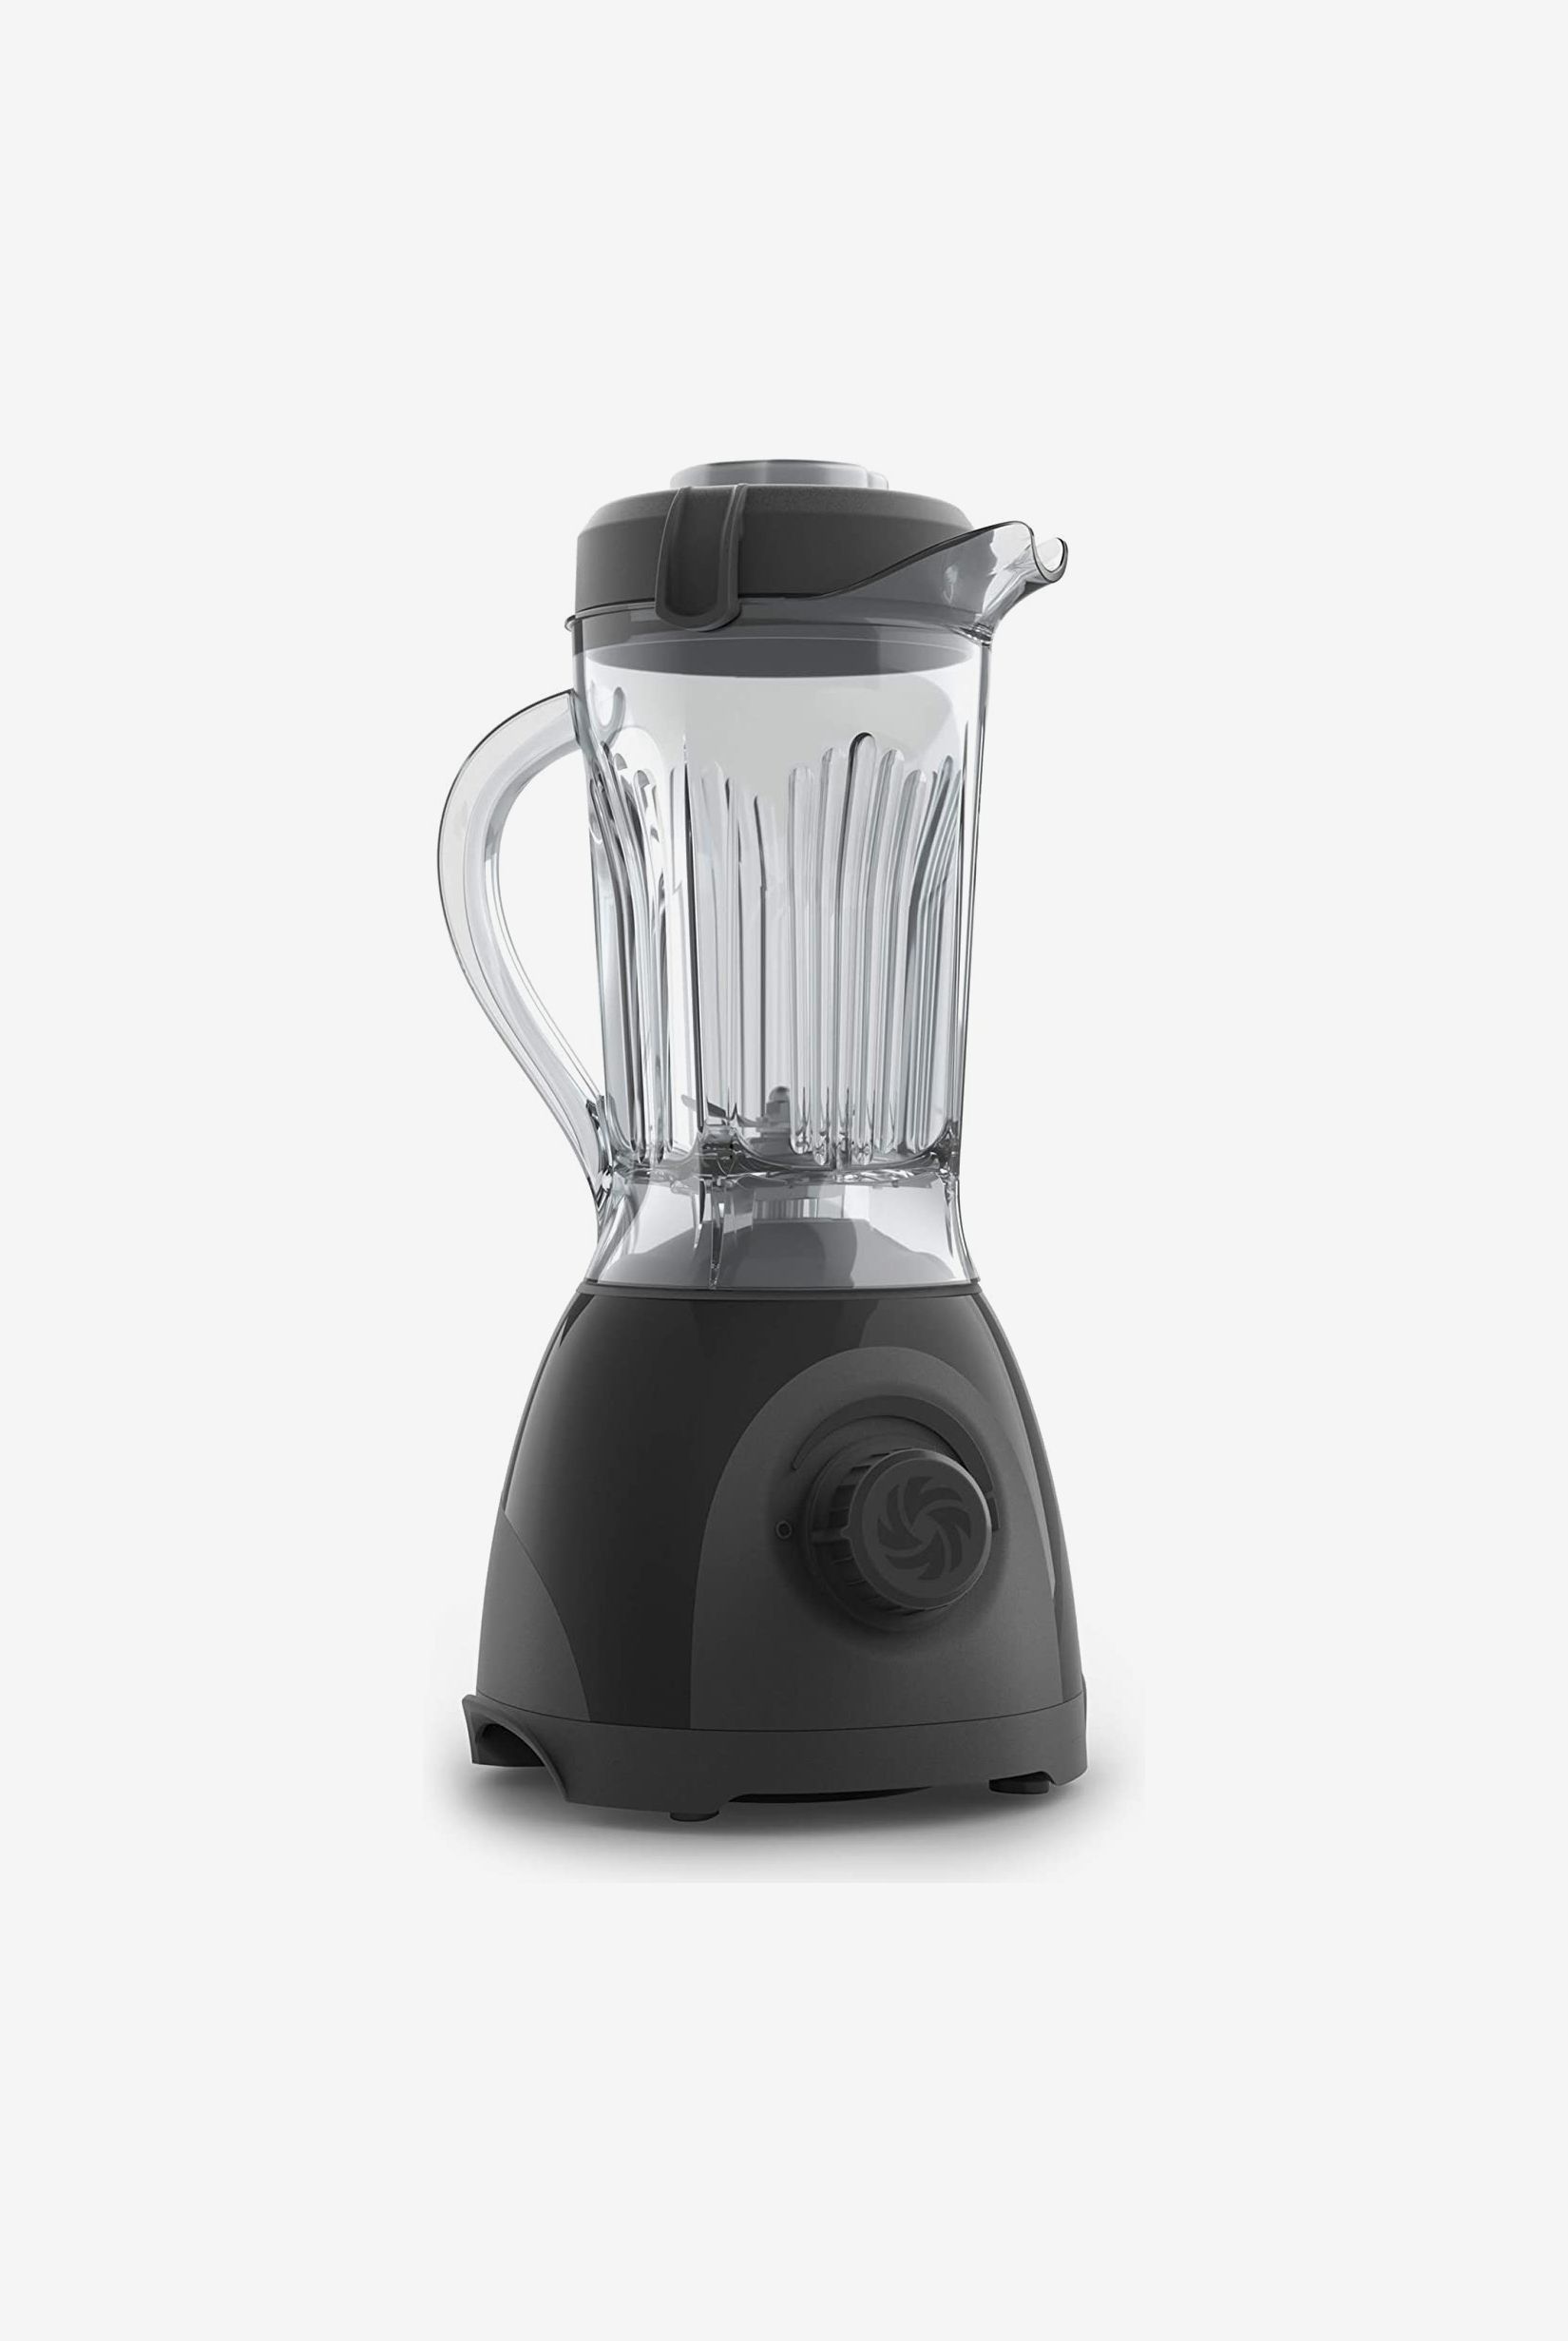 Perk up with a perk: 47% off a Keurig K-Classic coffee maker at